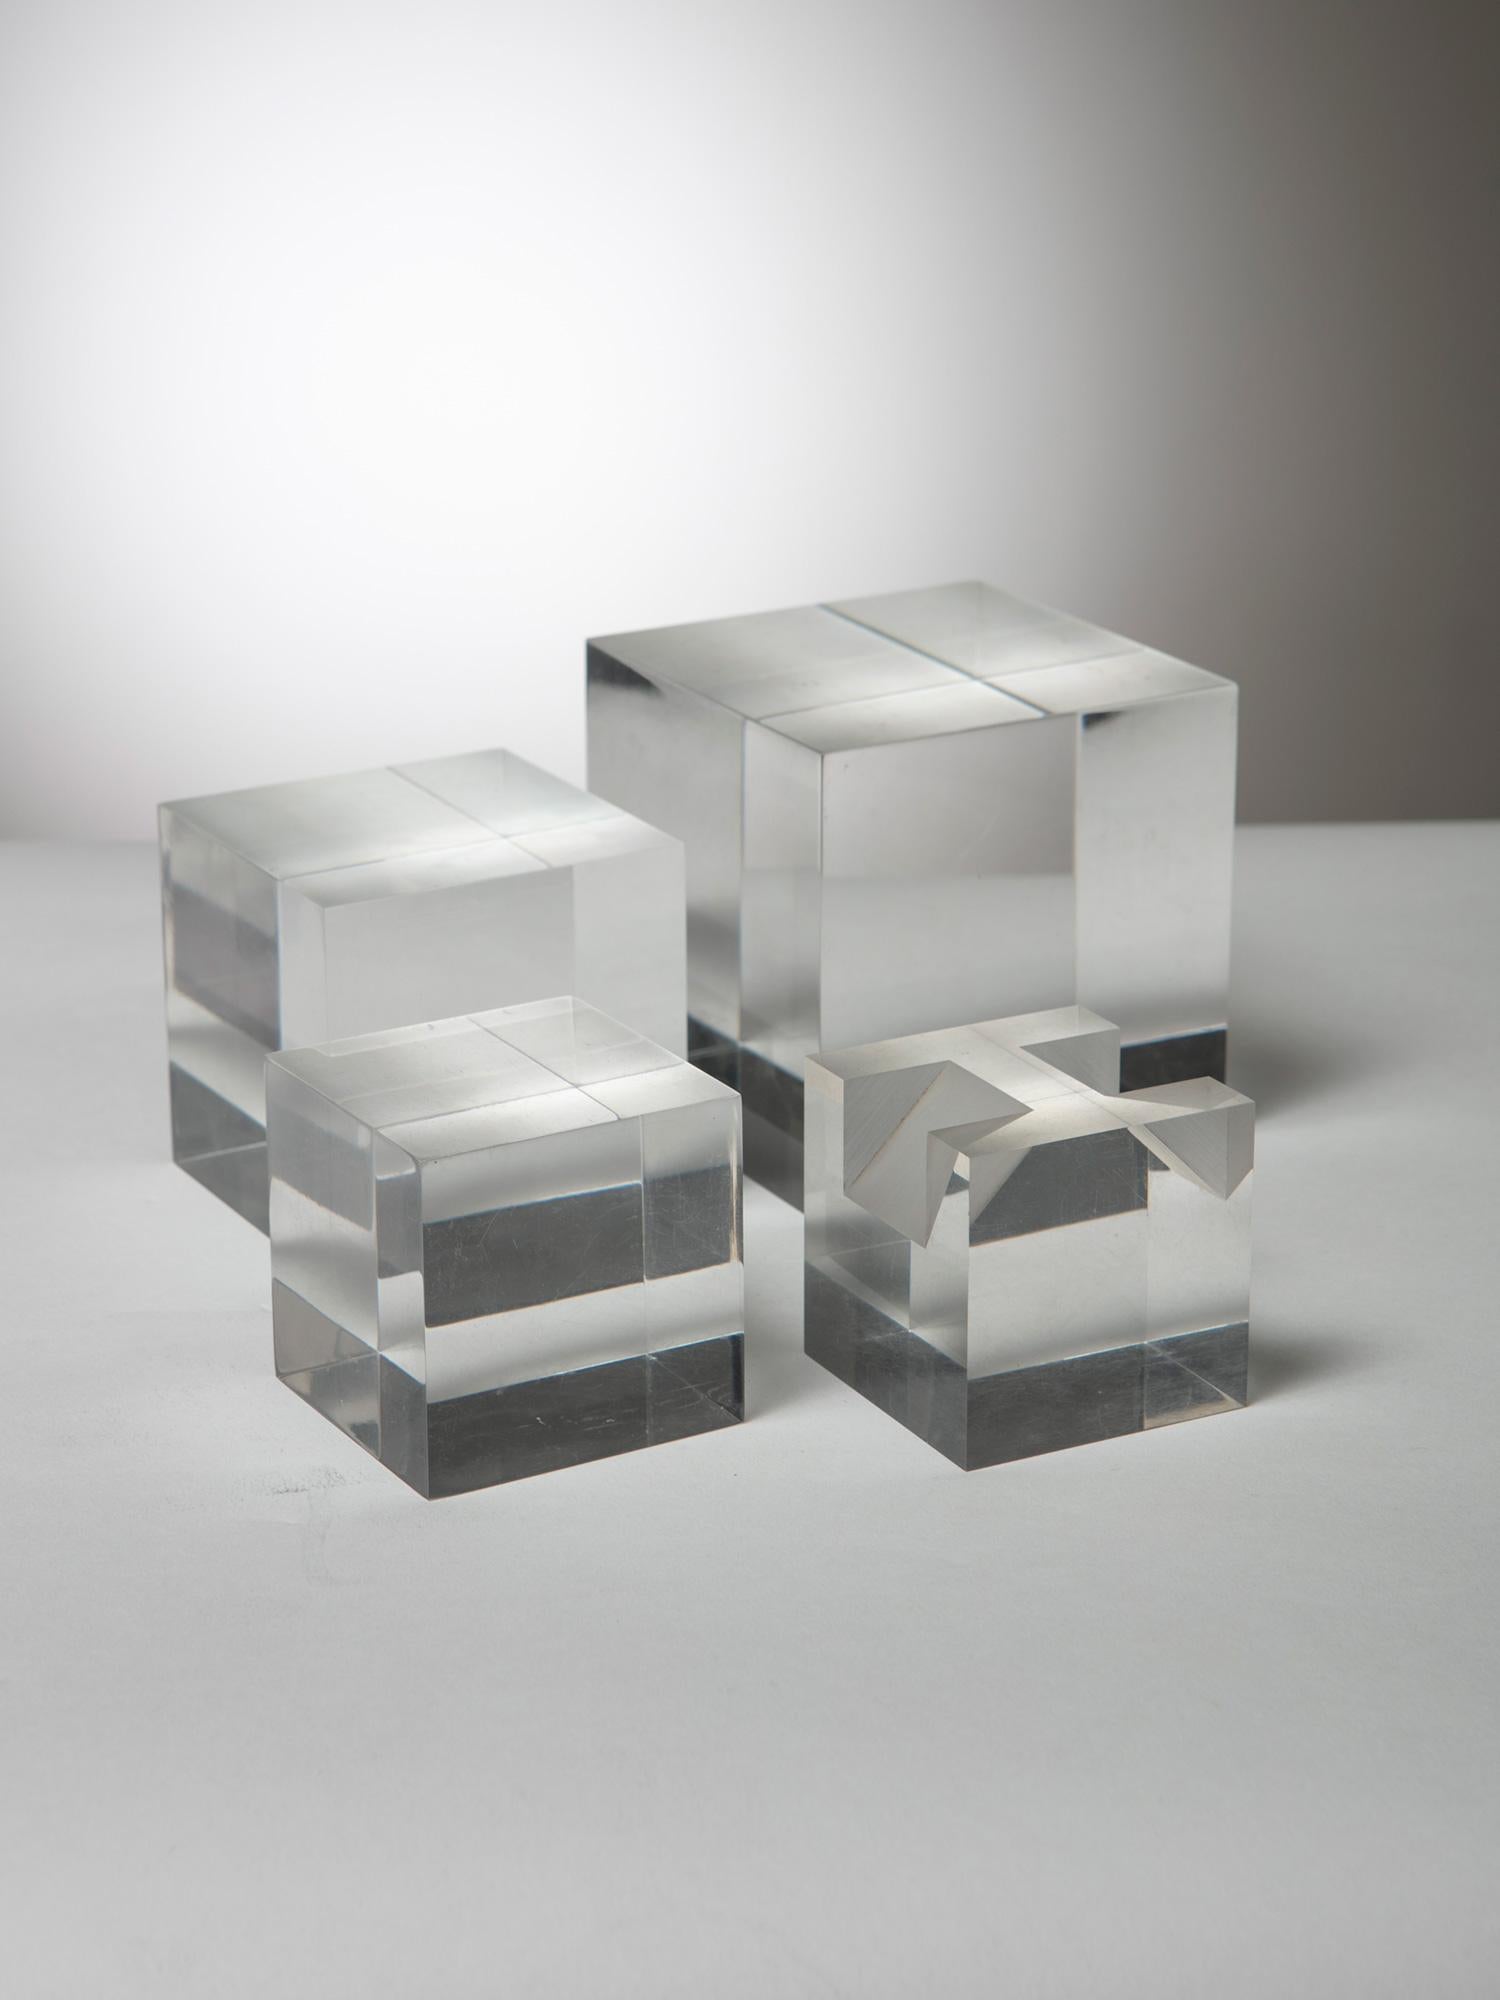 Plexiglass sculpture composed by four modular shapes by Alessio Tasca for Fusina